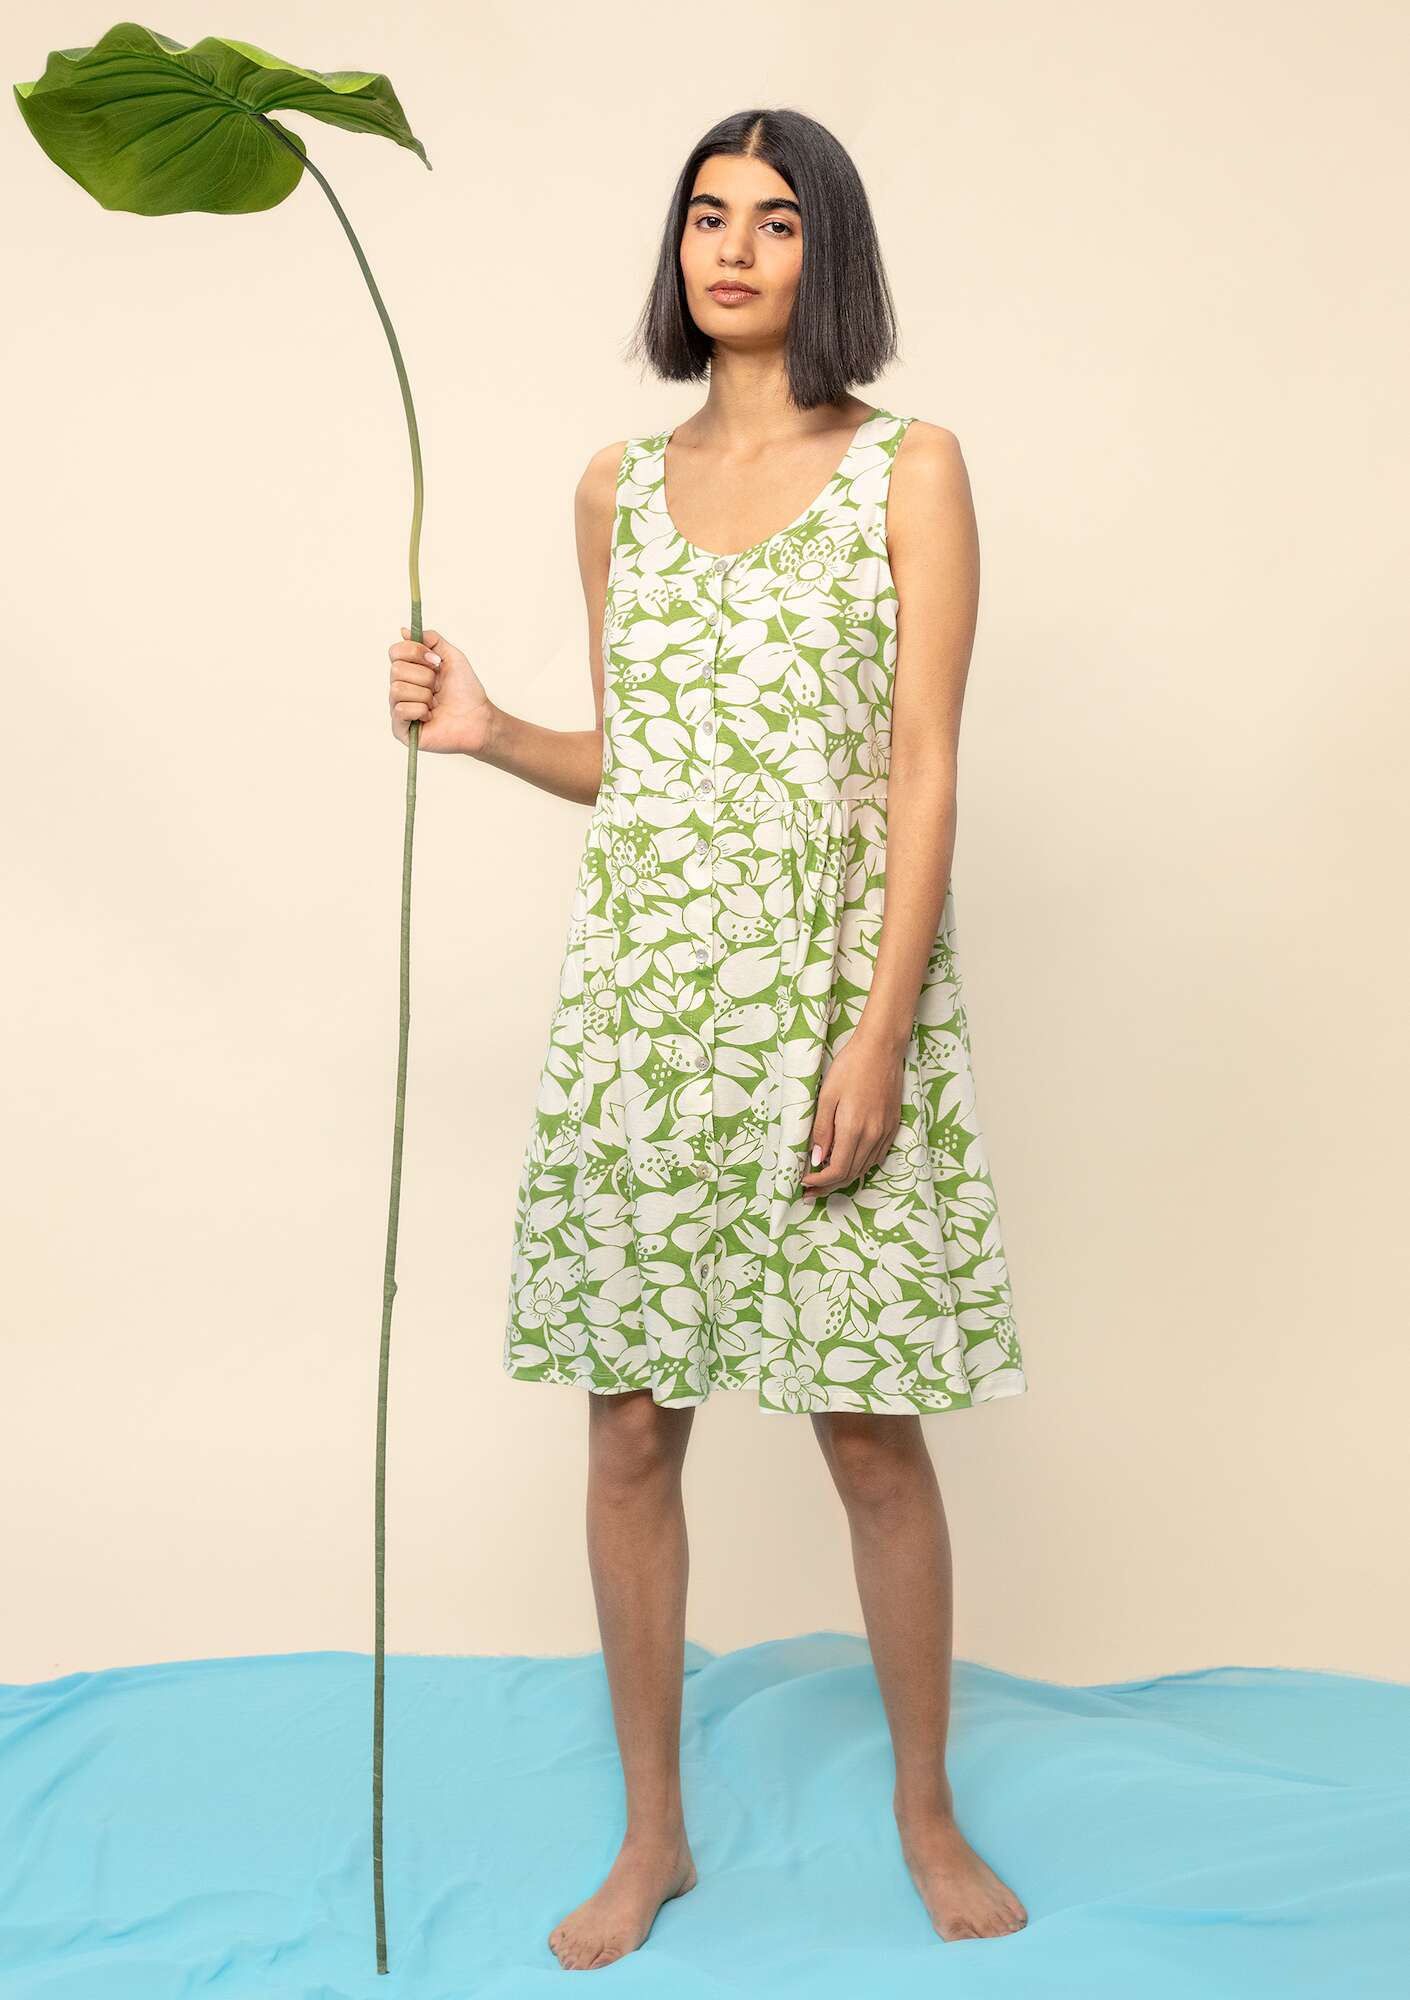 “Lotus” jersey dress in organic cotton cicada/patterned